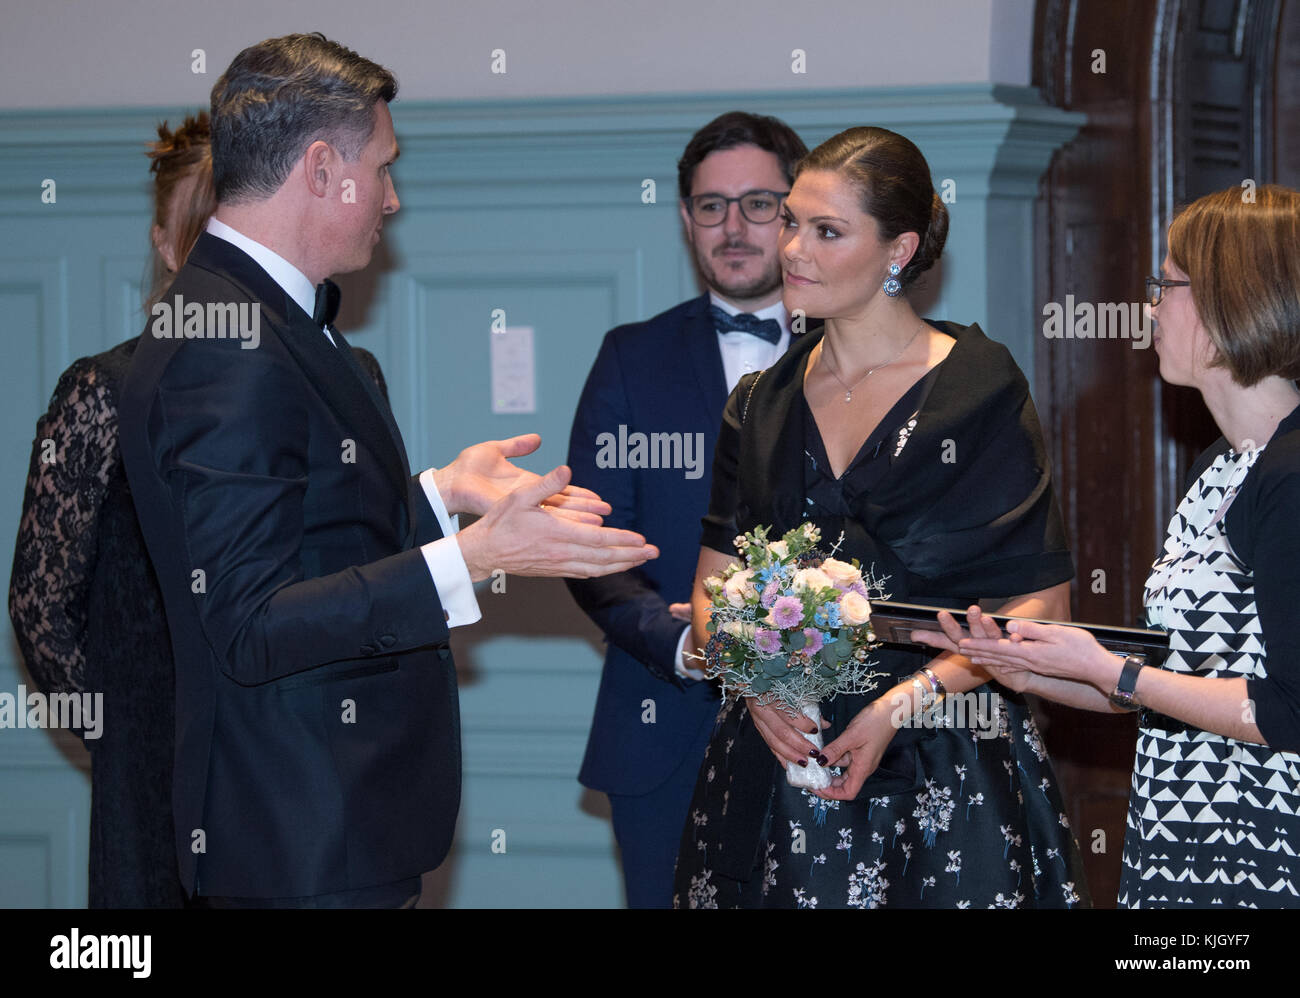 Crown Princess Victoria of Sweden (2-R) speaks with Frederic Laziou (L), managing director of Tacton Systems GmbH befor the award ceremony of the in Germany, Thomas Ryberg, in Leipzig, Germany, 23 November 2017. Crown Princess Victoria has been the patroness of the Swedish chamber of commerce in Germany since 2015 - they jointly award the prize with the Swedish embassy and Business Sweden. The award will be handed out for the 15th time this year, honouring successful Swedish companies in the German market. Photo: Hendrik Schmidt/dpa-Zentralbild/dpa Stock Photo